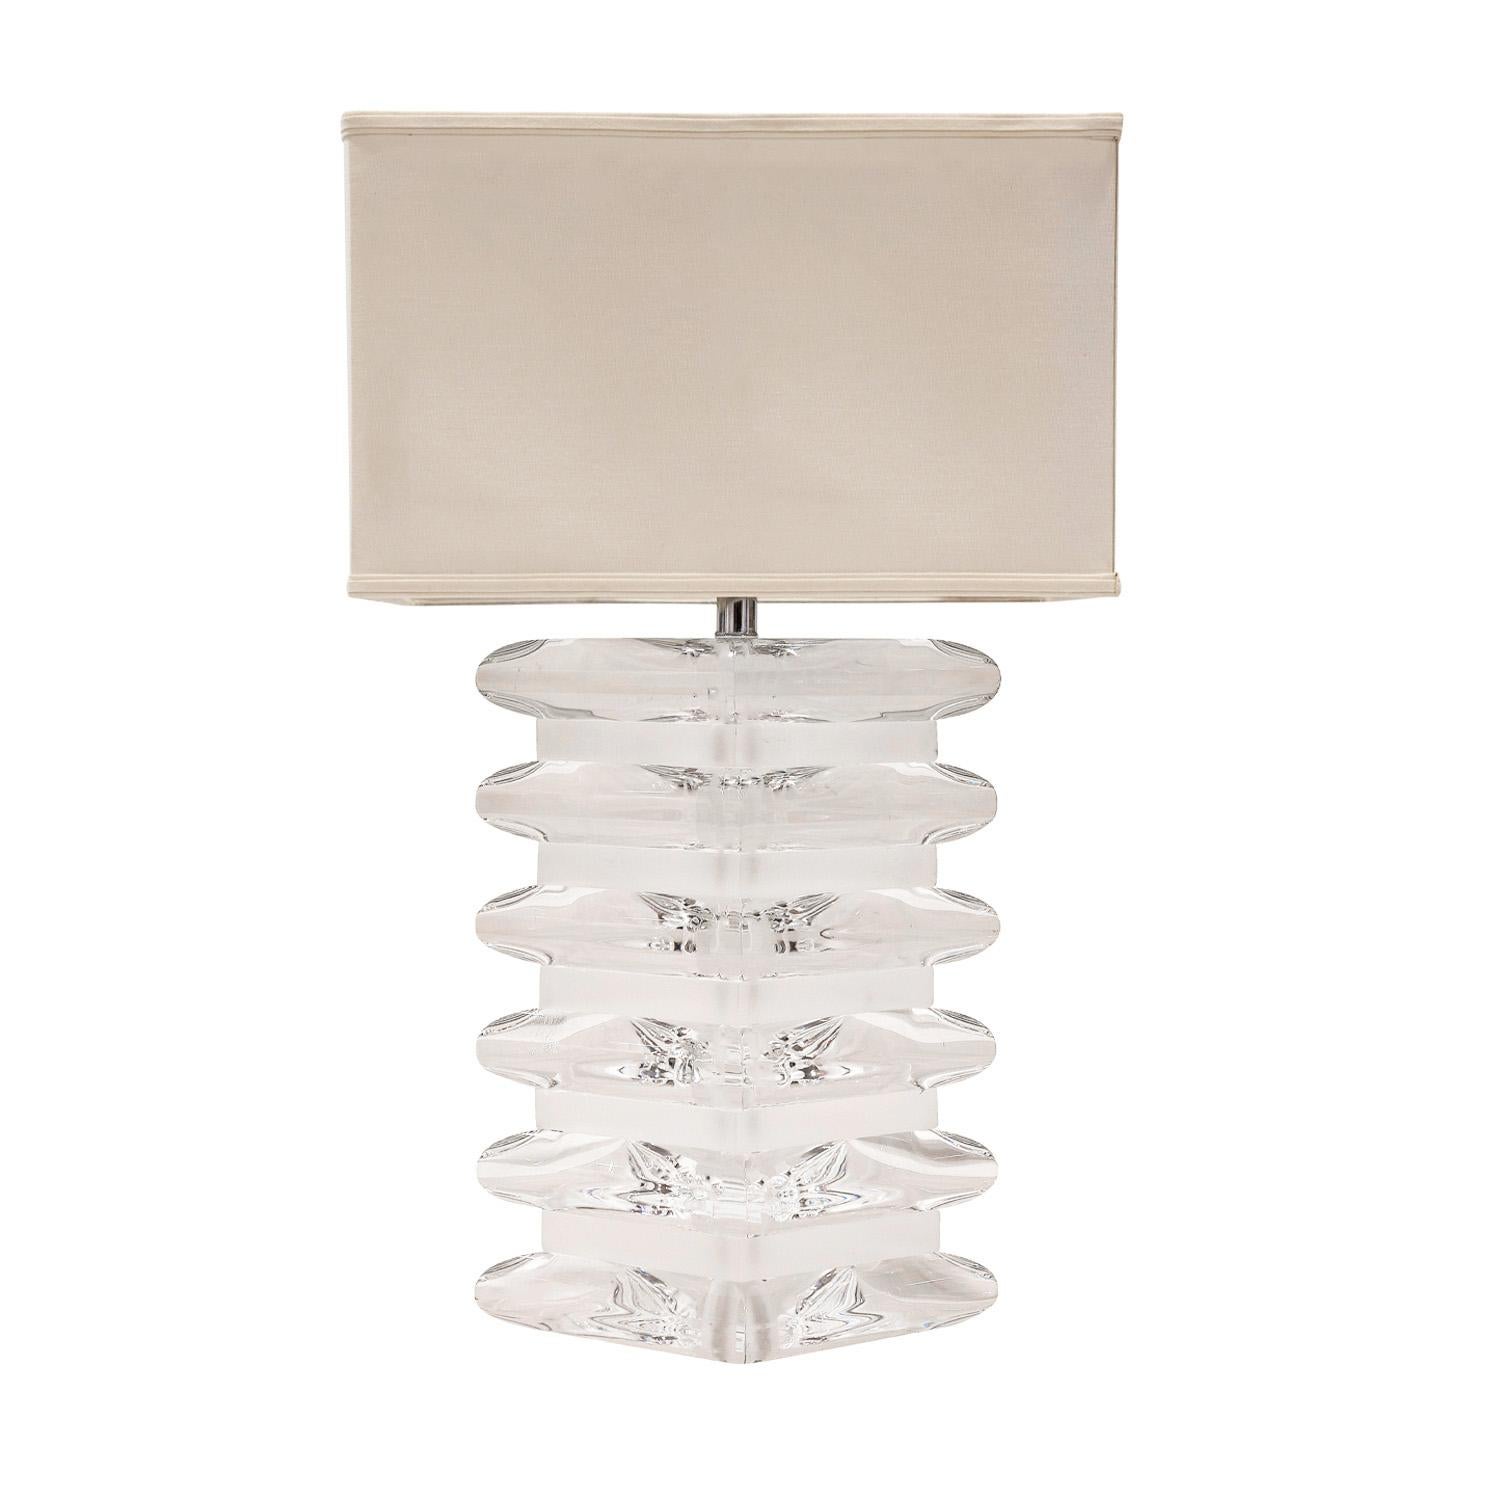 Impressive solid lucite table lamp, clear and frosted sections coming to points on both sides, American 1970's.  This lamp is beautifully made.

Shade W: 16 inches
Shade D: 10 inches
Shade H: 12 inches